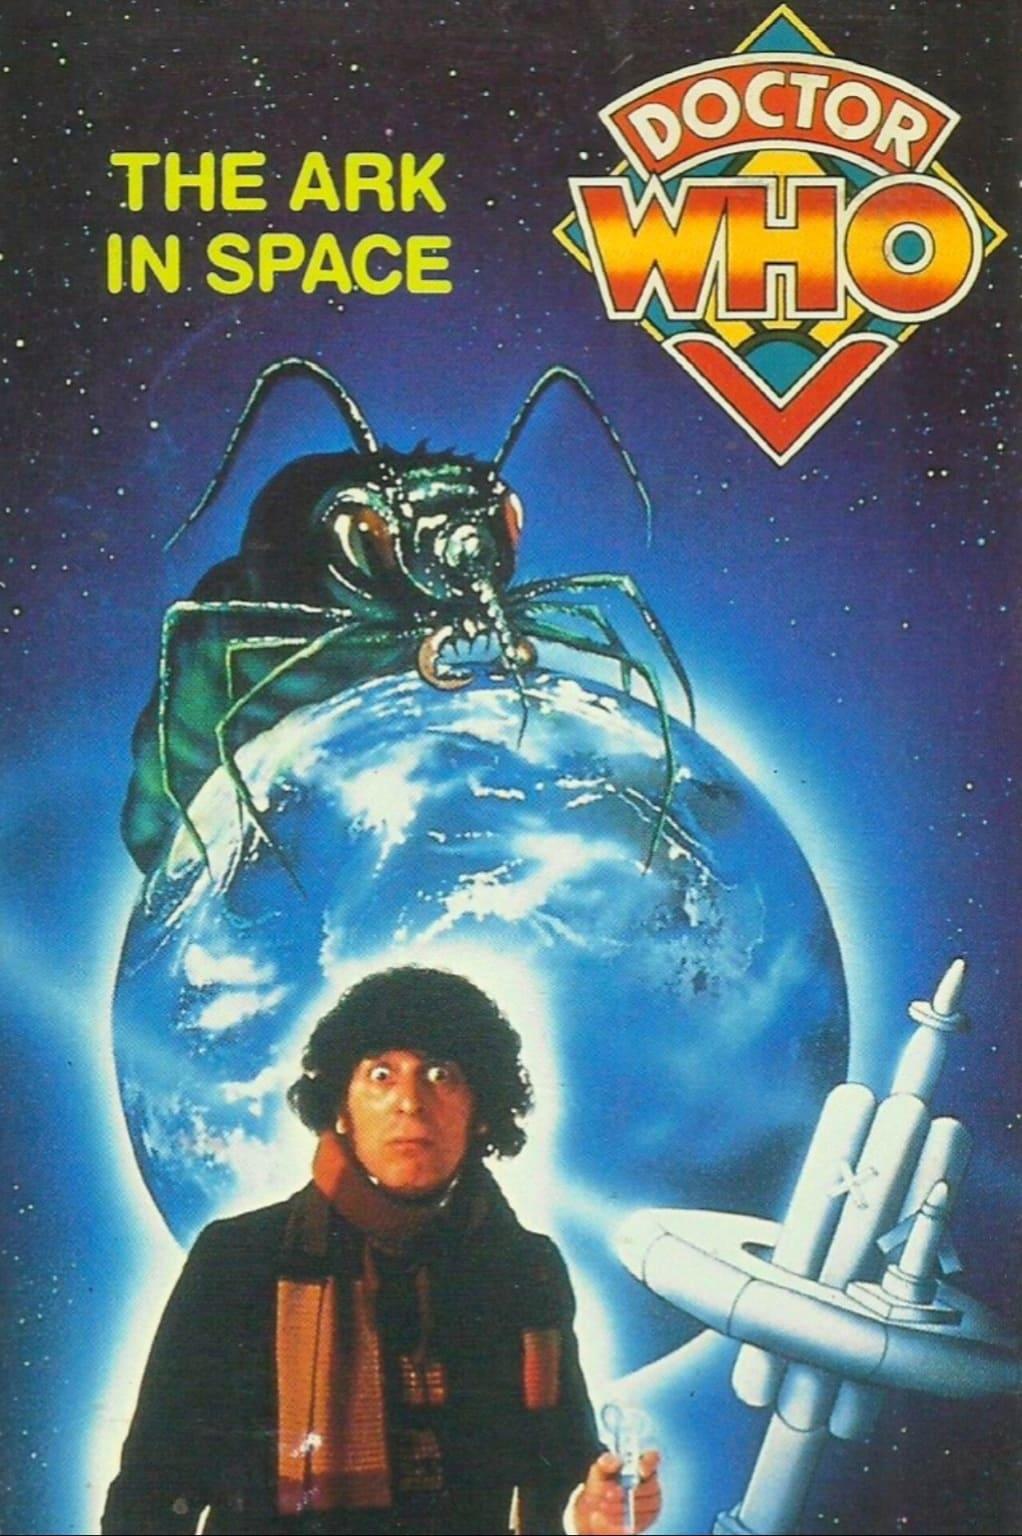 Doctor Who: The Ark in Space poster